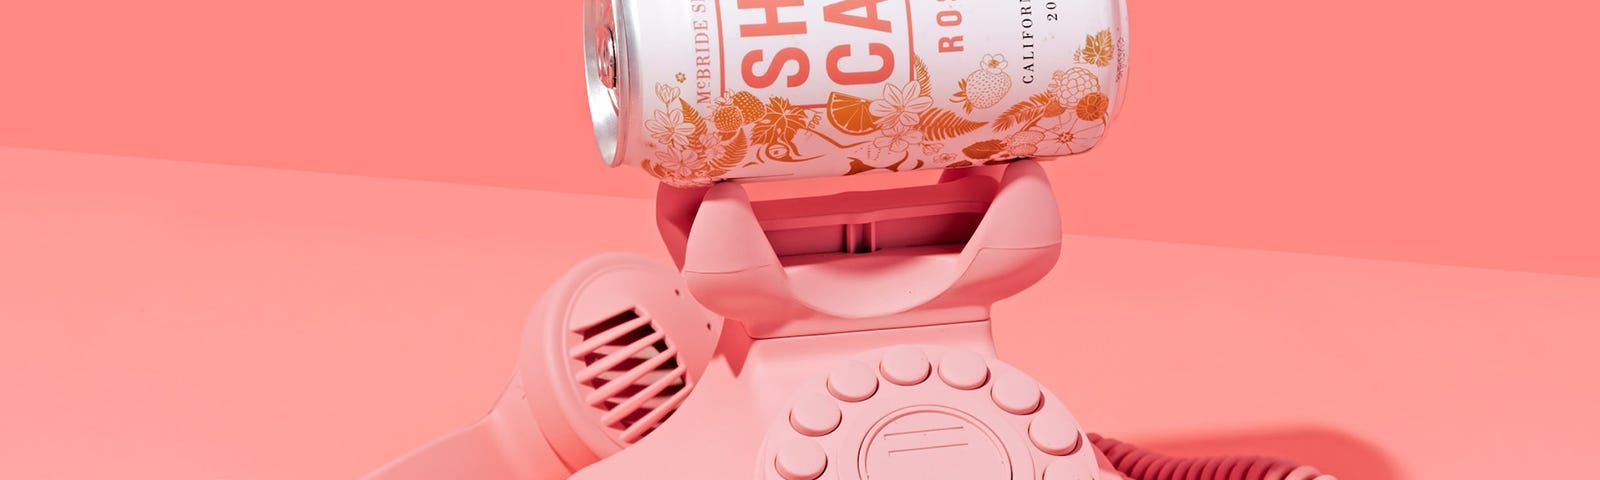 pink old telephone with a soda can that says ‘she can’ against a pink background